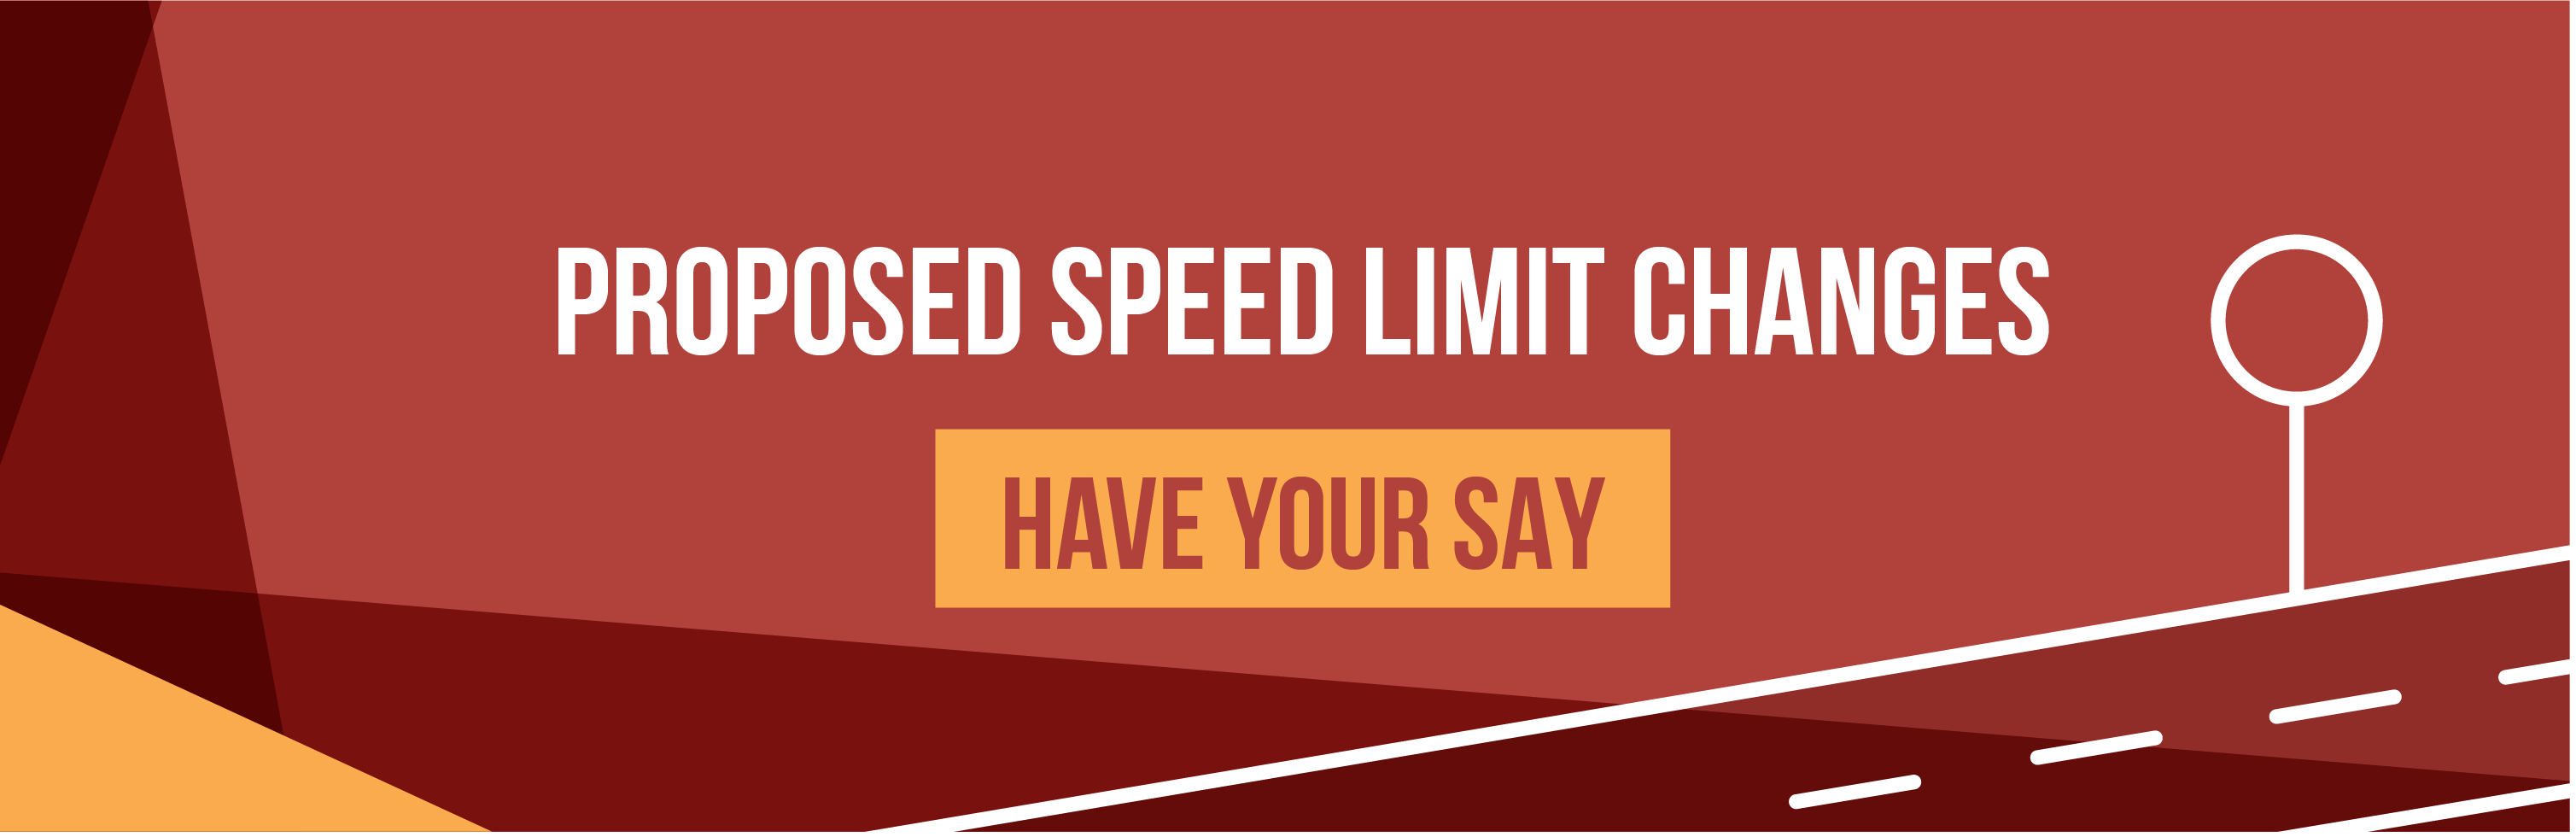 Proposed Speed Limit Changes webbanner